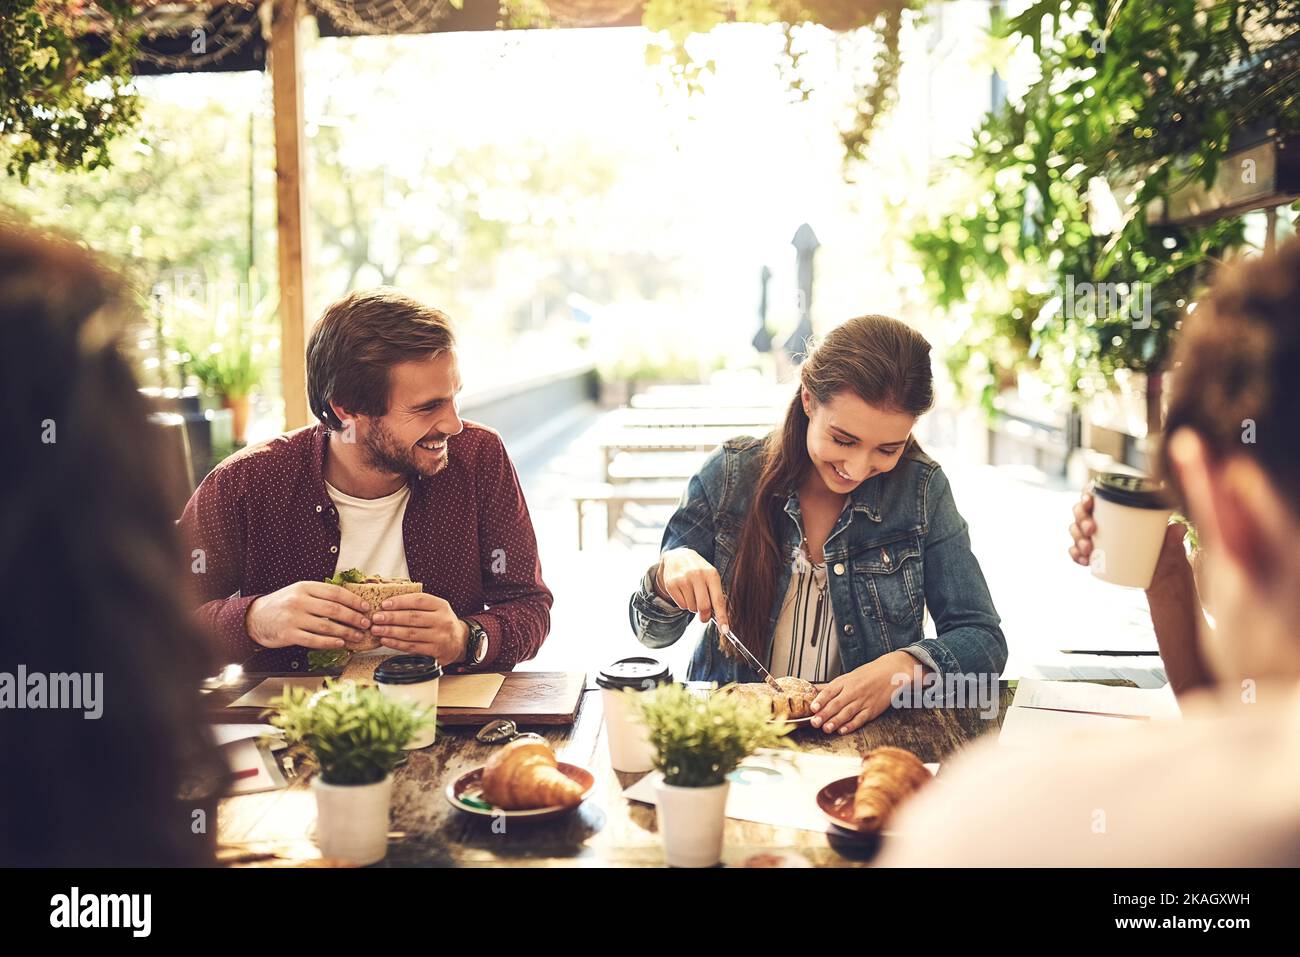 She cant wait to dig in. creative employees having a breakfast meeting outside. Stock Photo